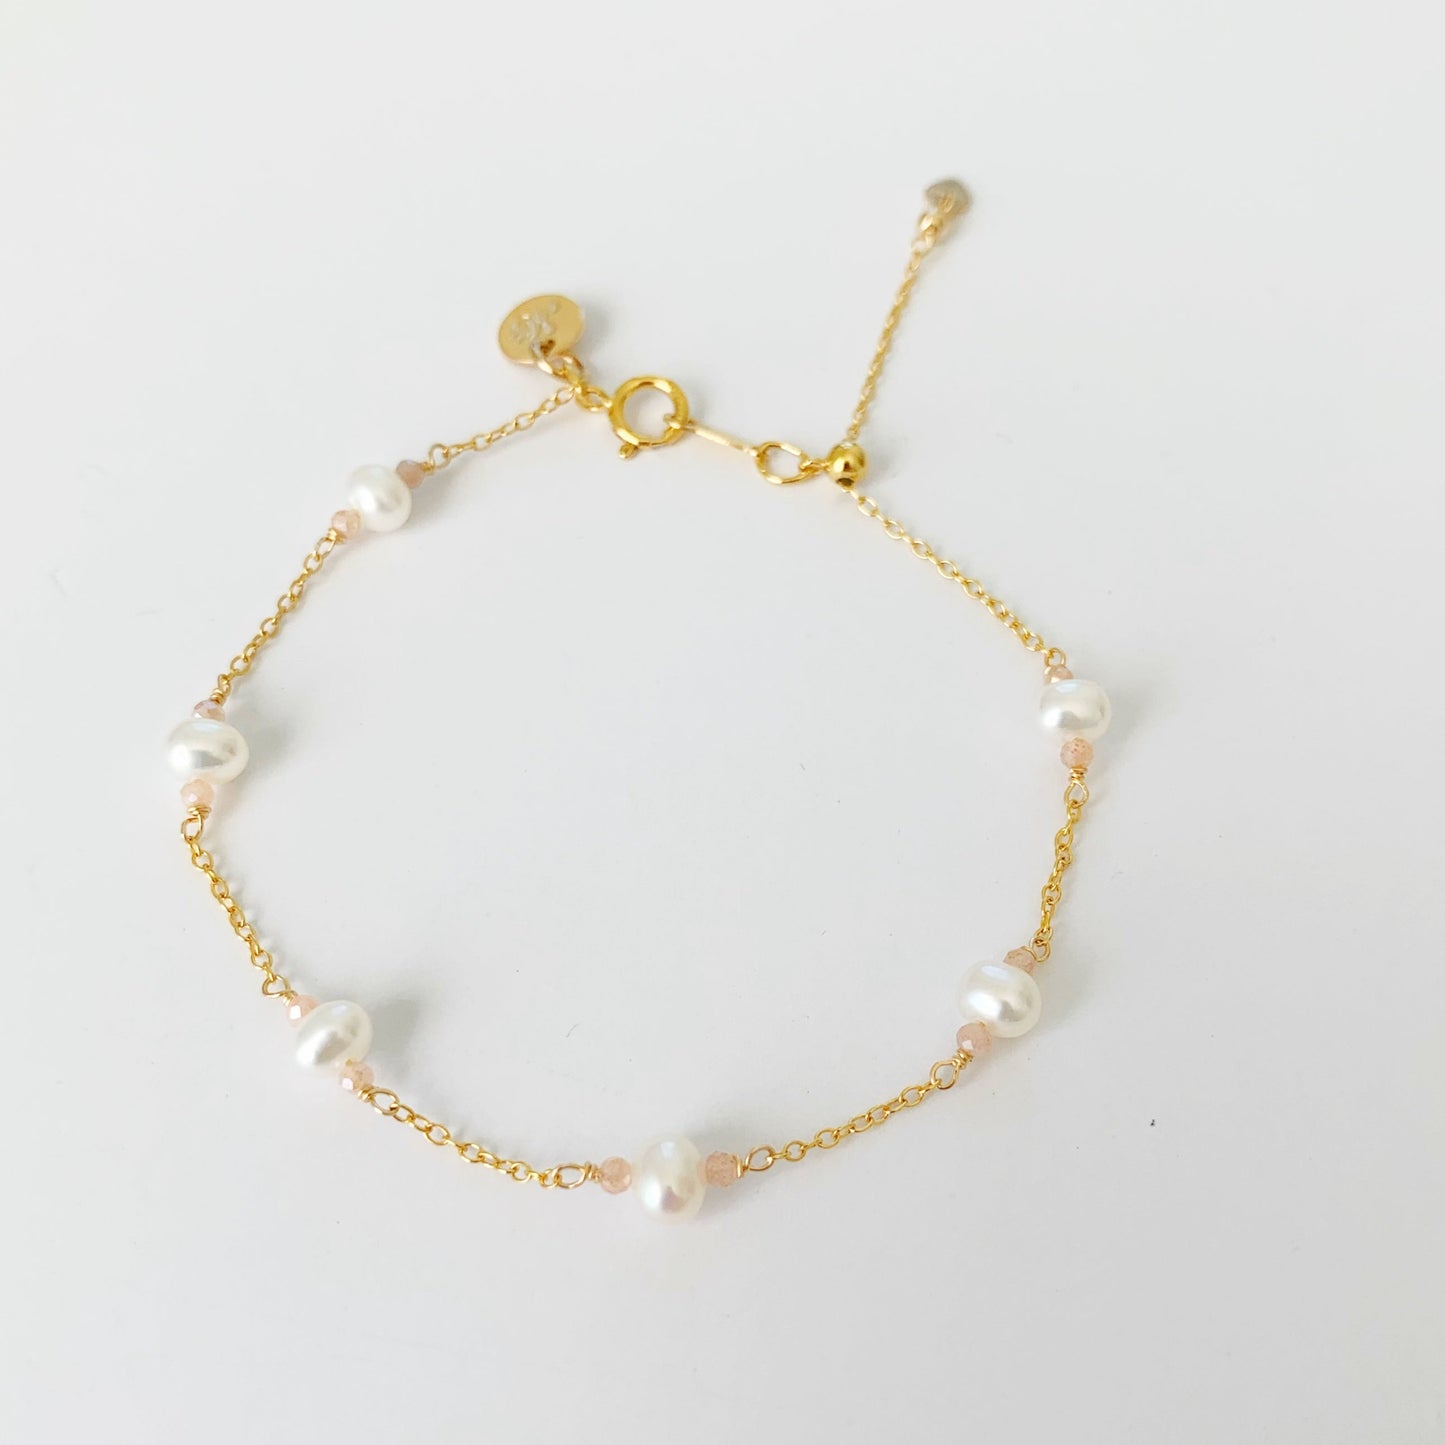 A top view of the barrington bracelet on a white surface